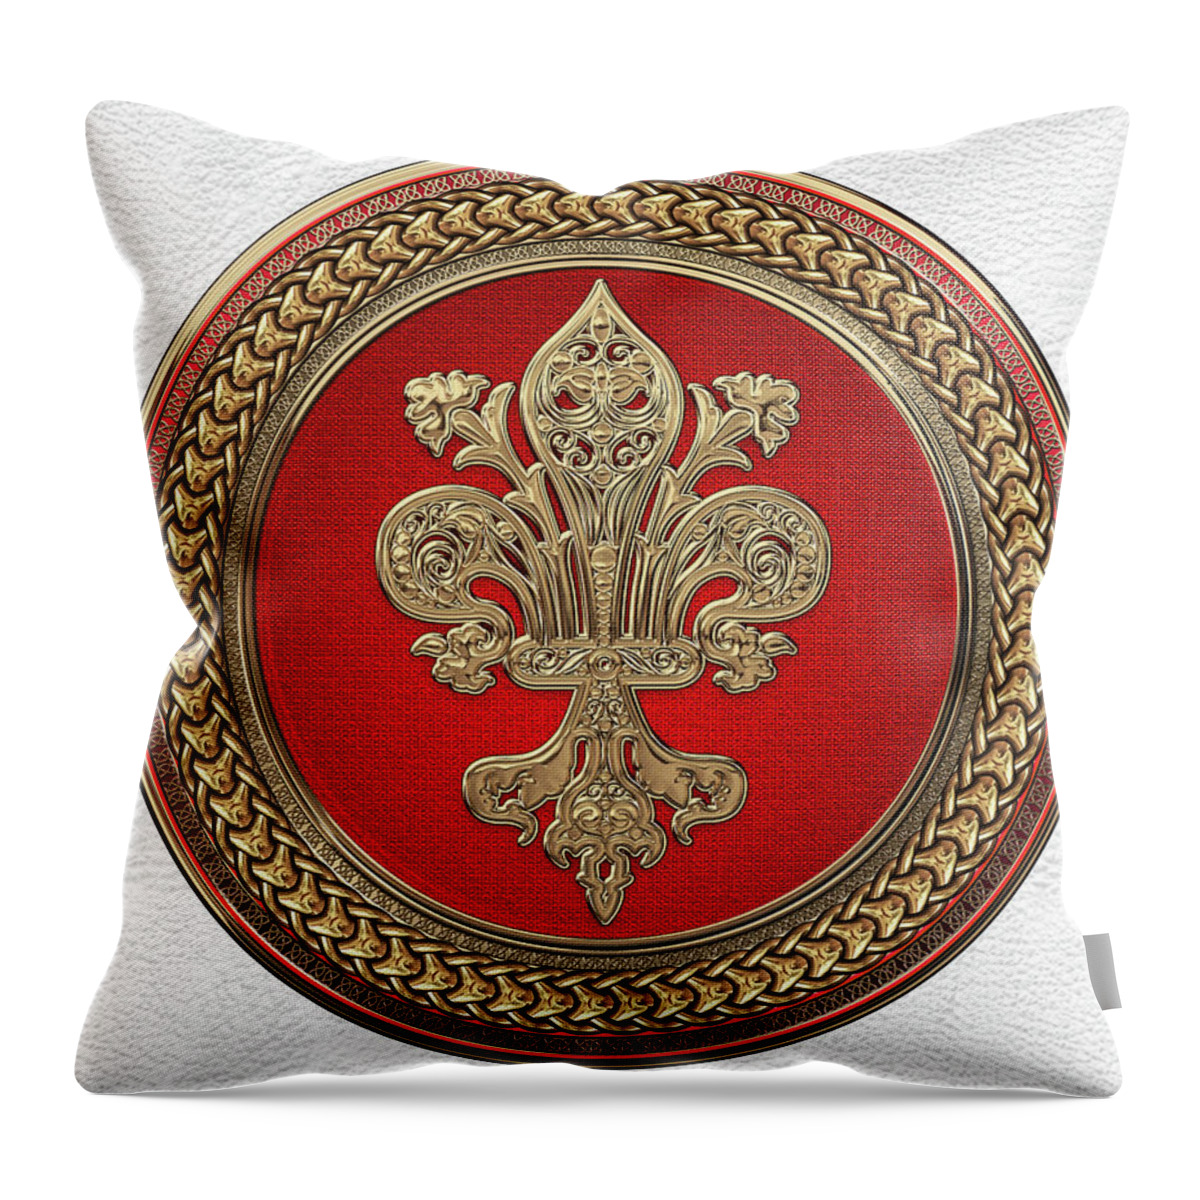 Silver Filigree Fleur-de-Lis on Silver and Black Medallion over Red Leather  Metal Print by Serge Averbukh - Pixels Merch